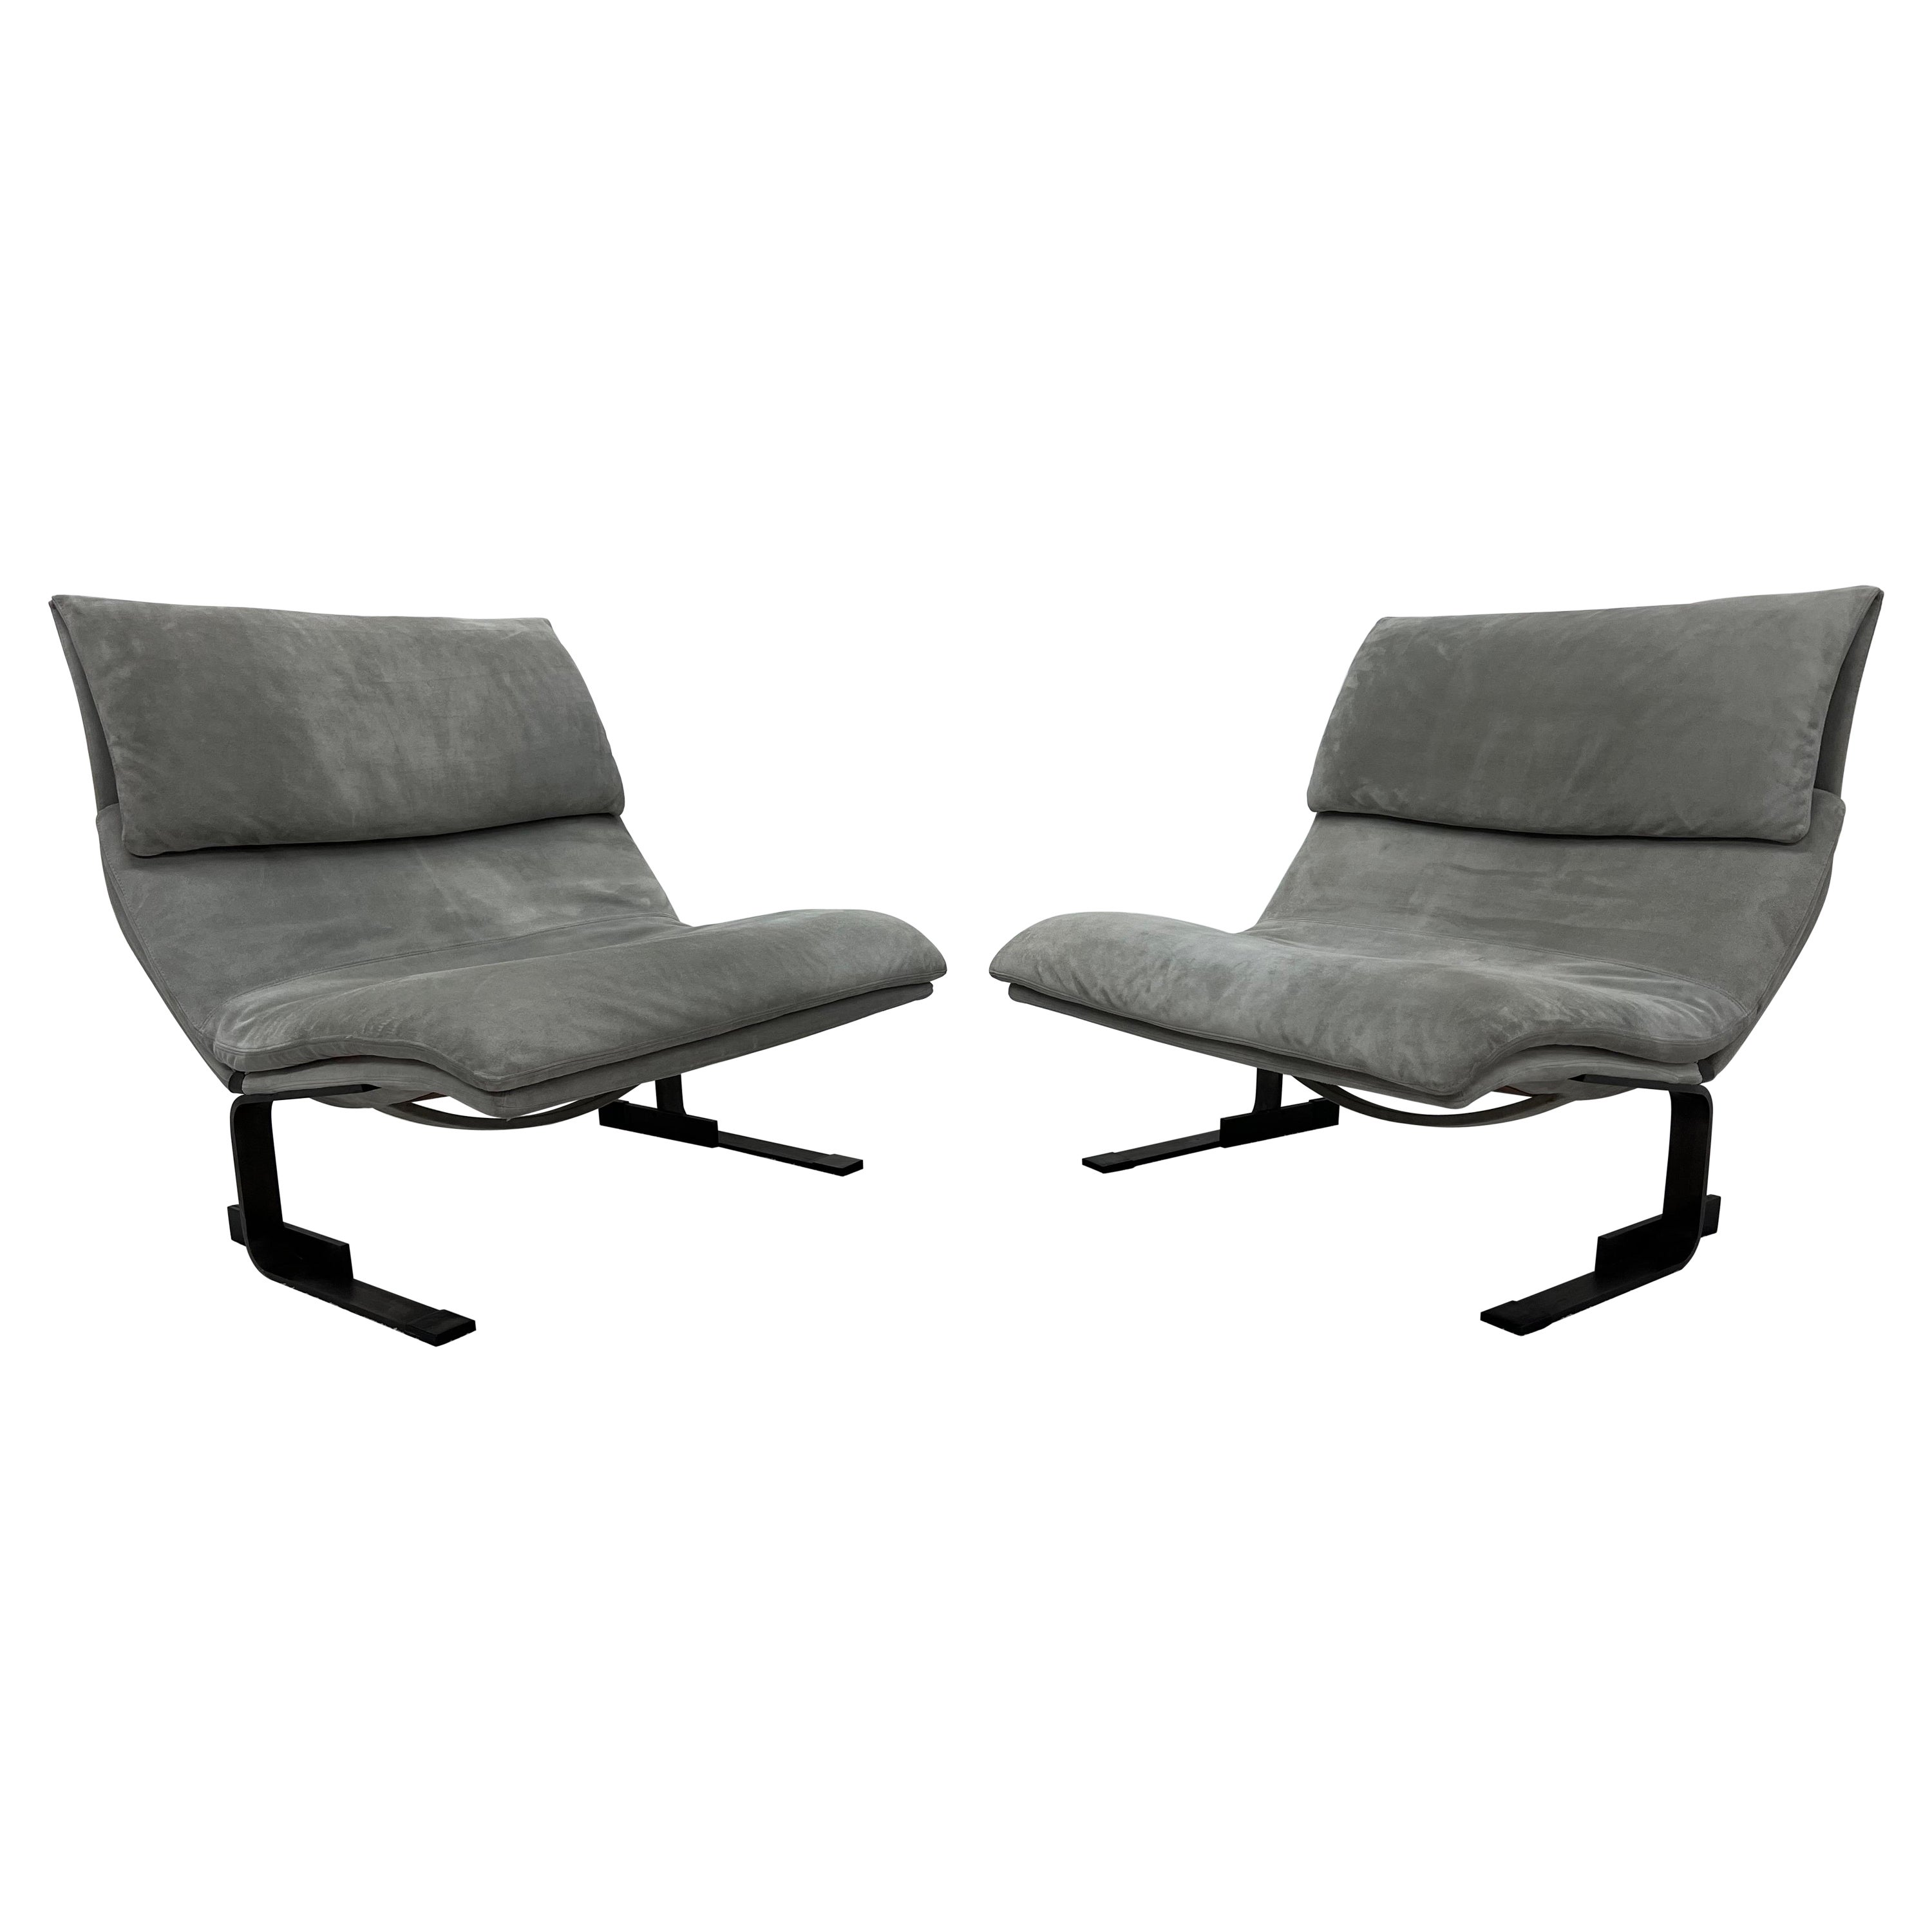 Pair of Giovanni Offredi Suede Onda Wave Lounge Chairs for Saporiti